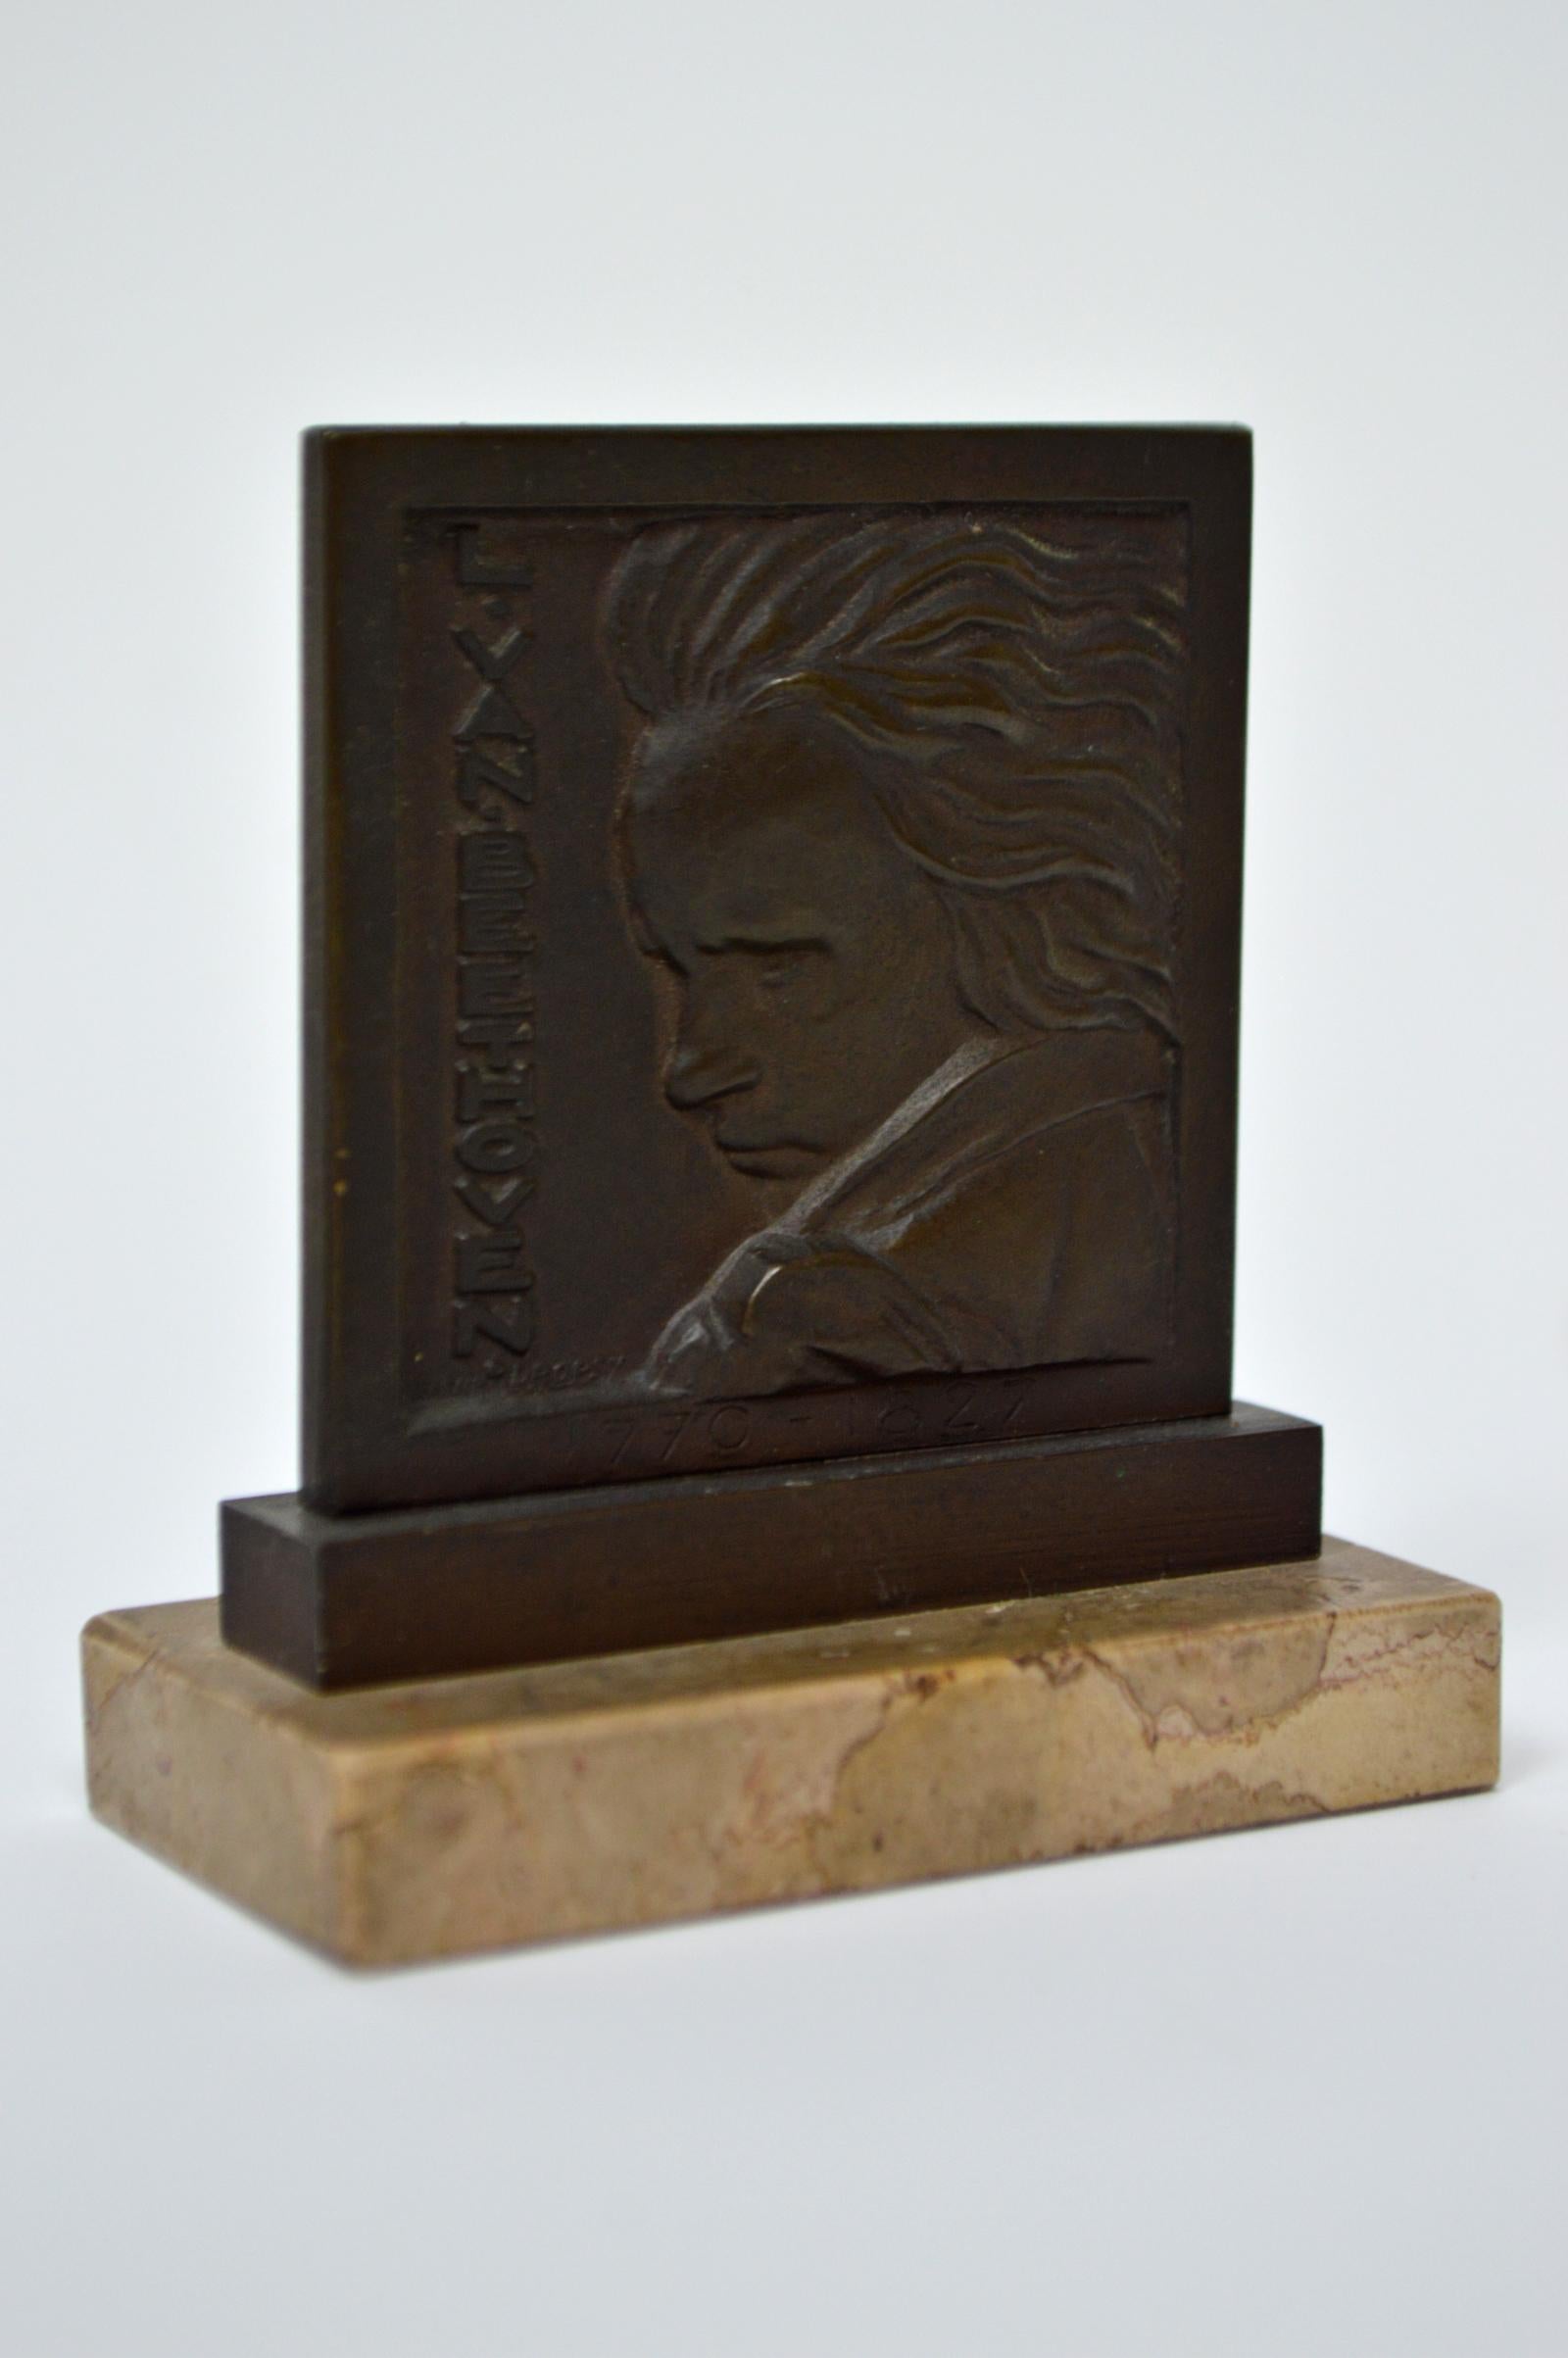 Bronze medal mounted on marble by Henri Dropsy (1885-1969).
Bust of the musician Ludwig van Beethoven.
Presumably made on the occasion of the centenary of the death of Beethoven.
France, 1920s
Inscriptions: 